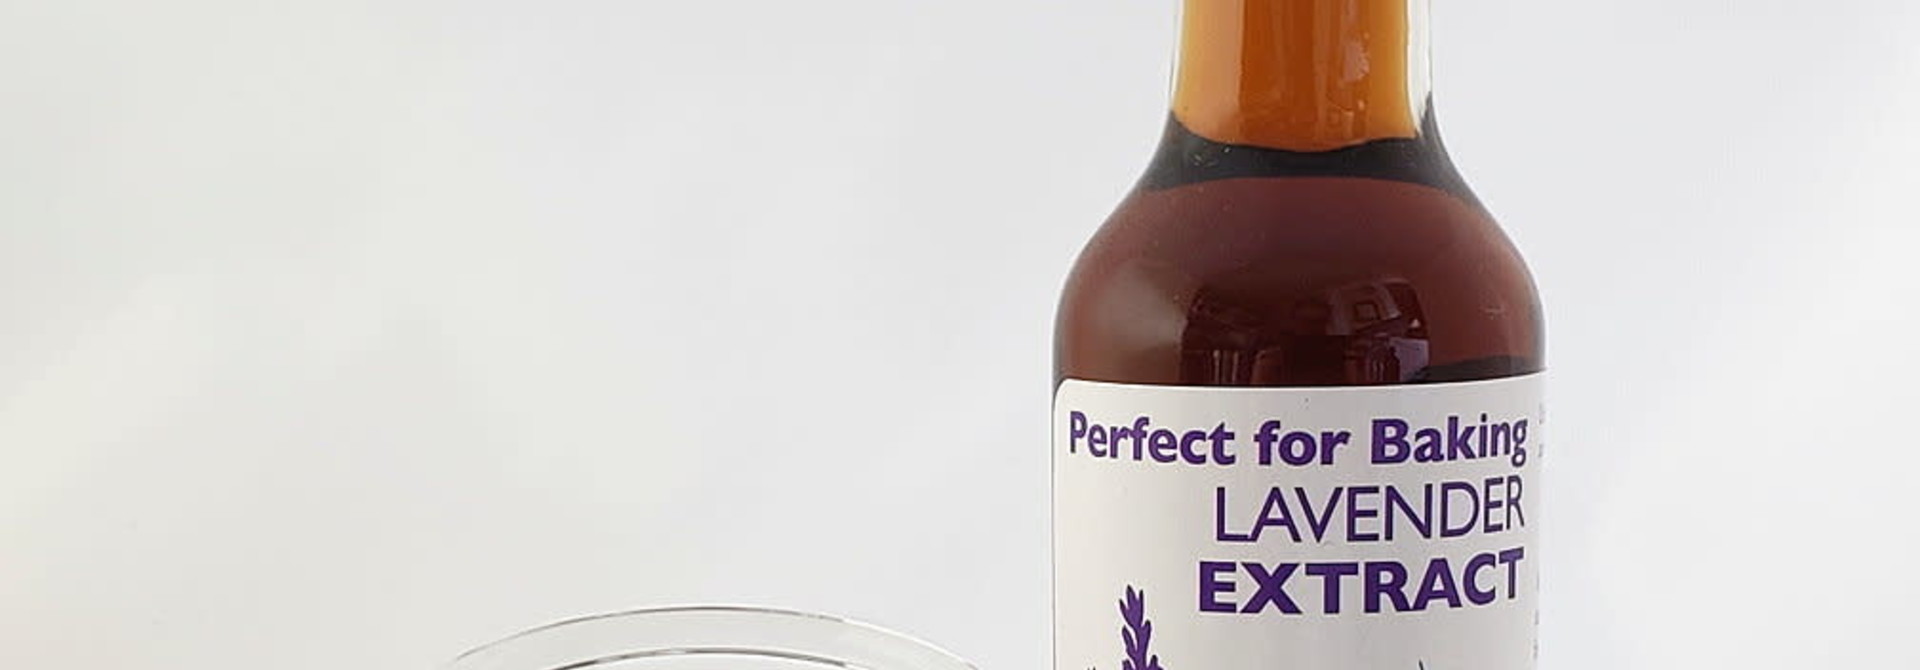 Lavender Baking Extract Small